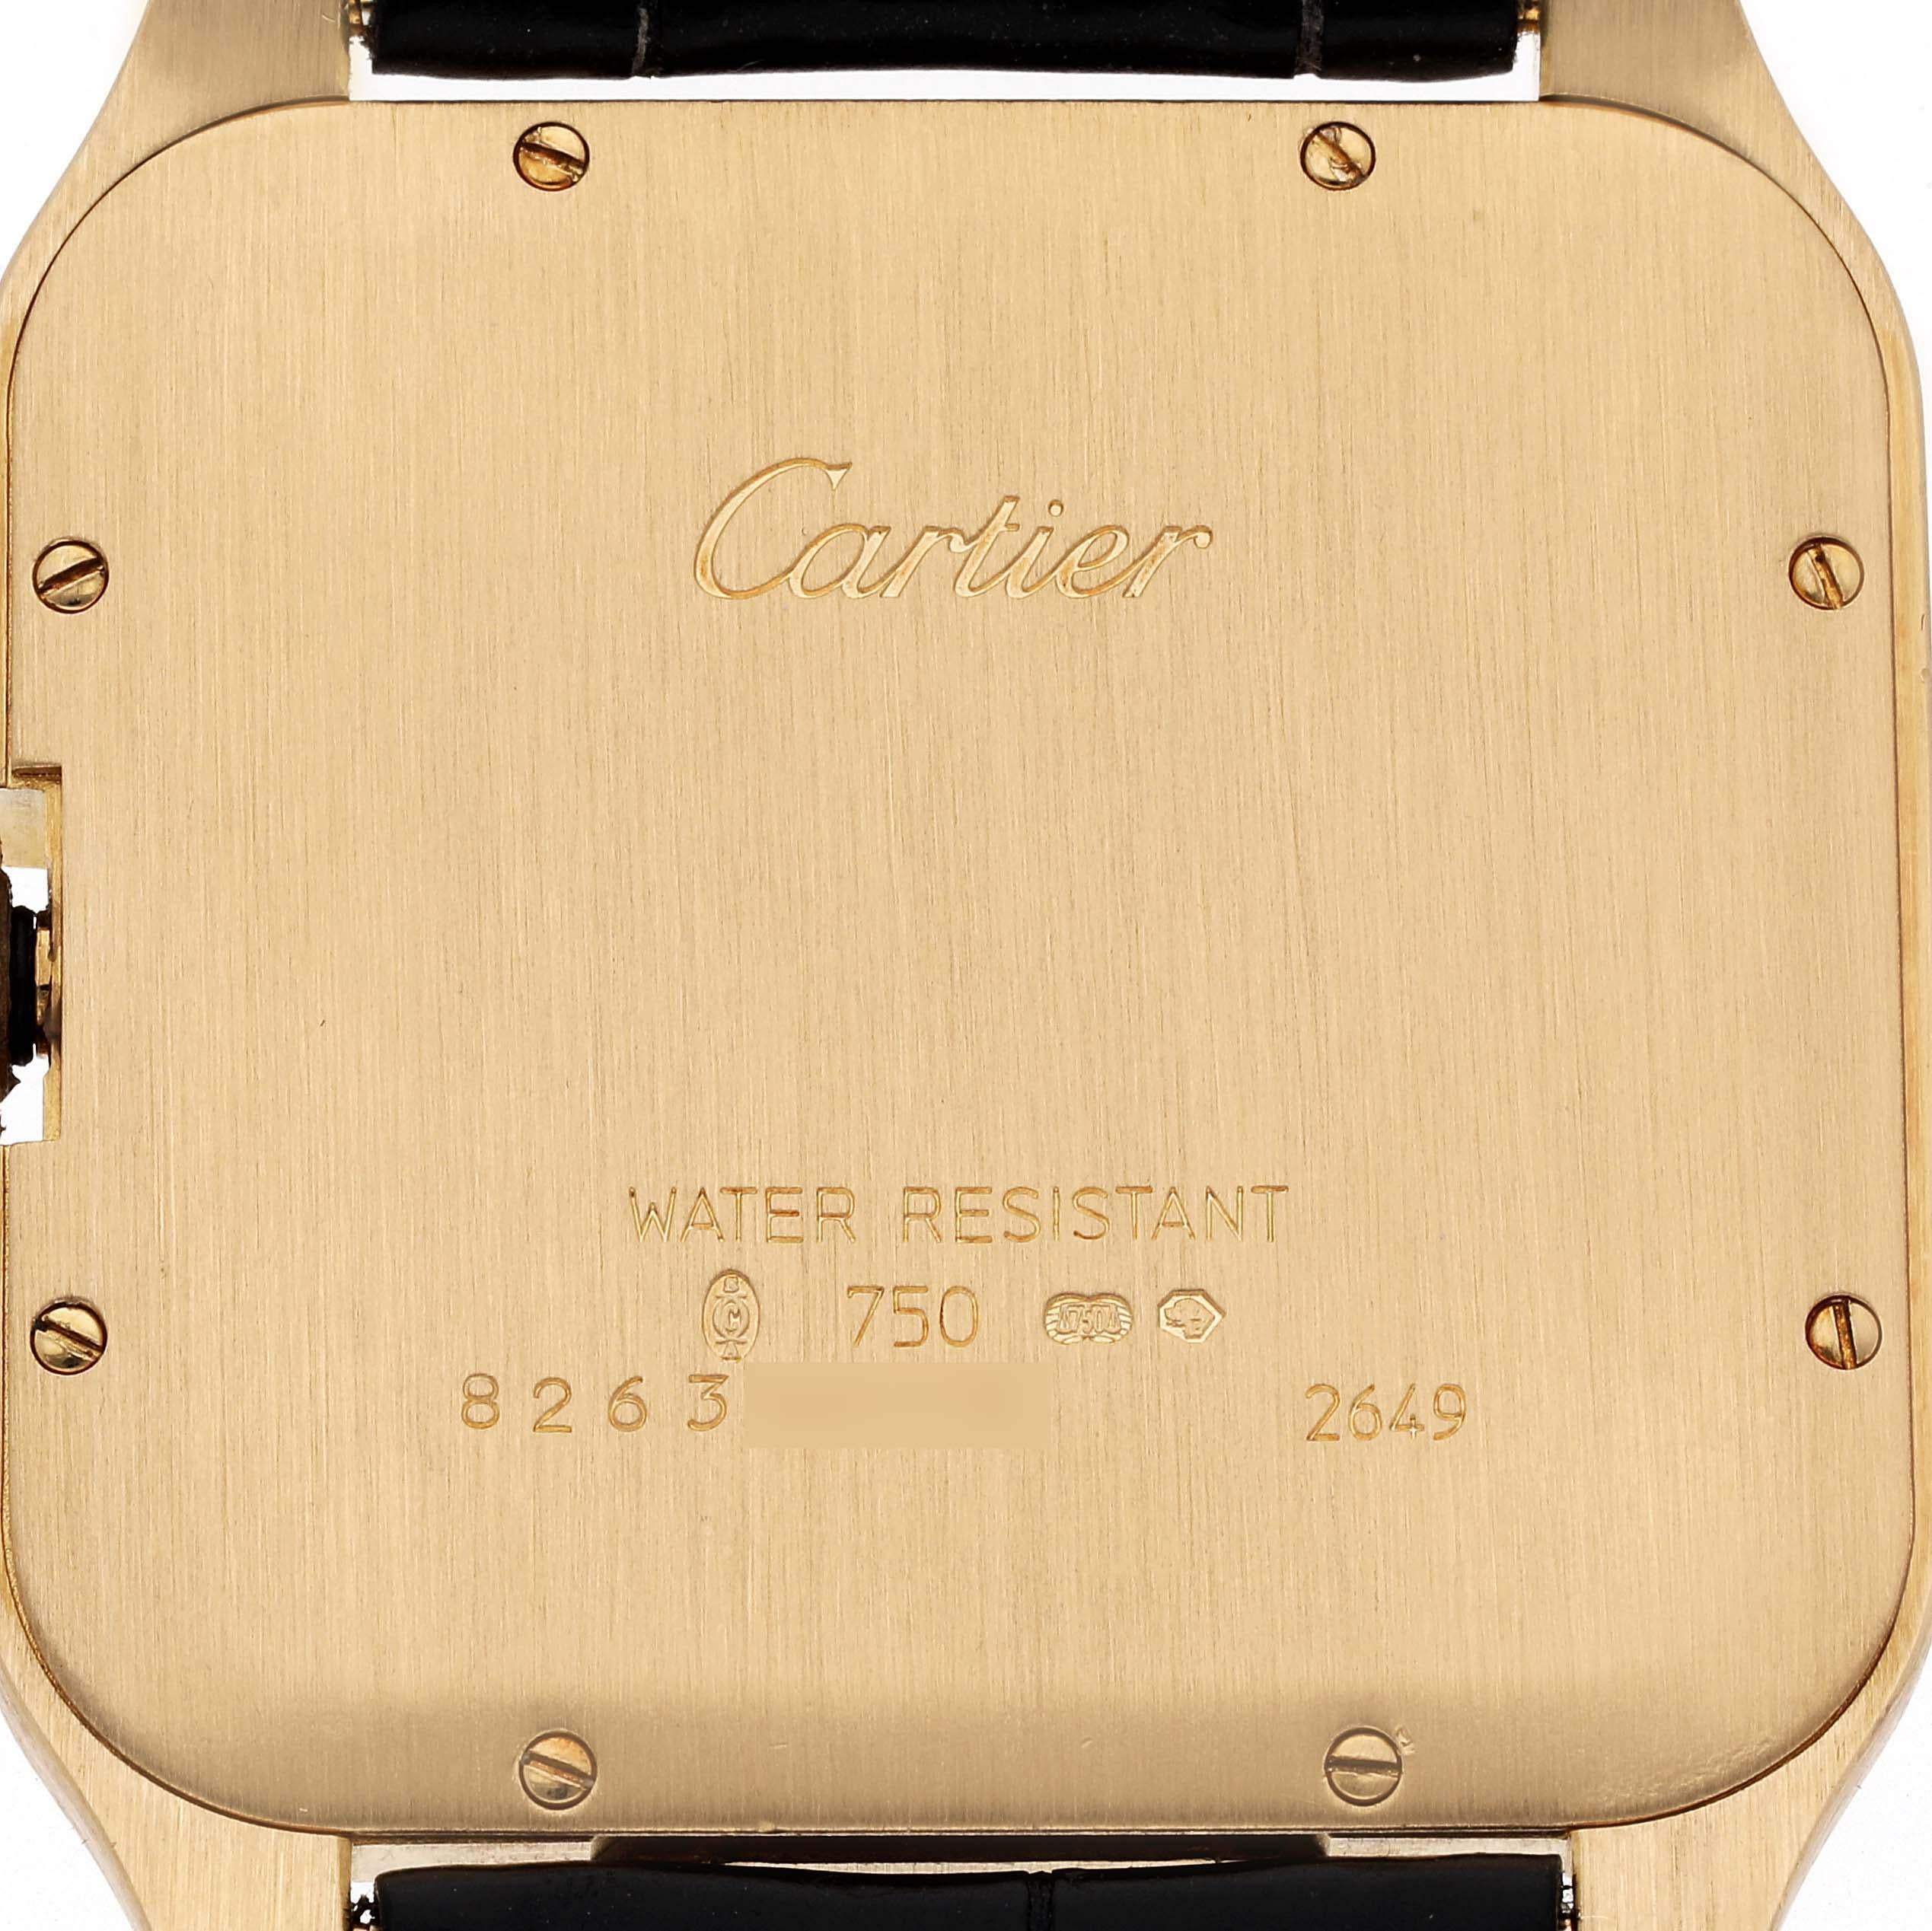 Cartier Santos Dumont Yellow Gold Mens Watch W2008751. Manual winding movement. 18K yellow gold case 44.6 x 34.6mm.  Octagonal crown set with faceted blue sapphire. 18K yellow gold bezel. Scratch resistant sapphire crystal. Silver dial with radial